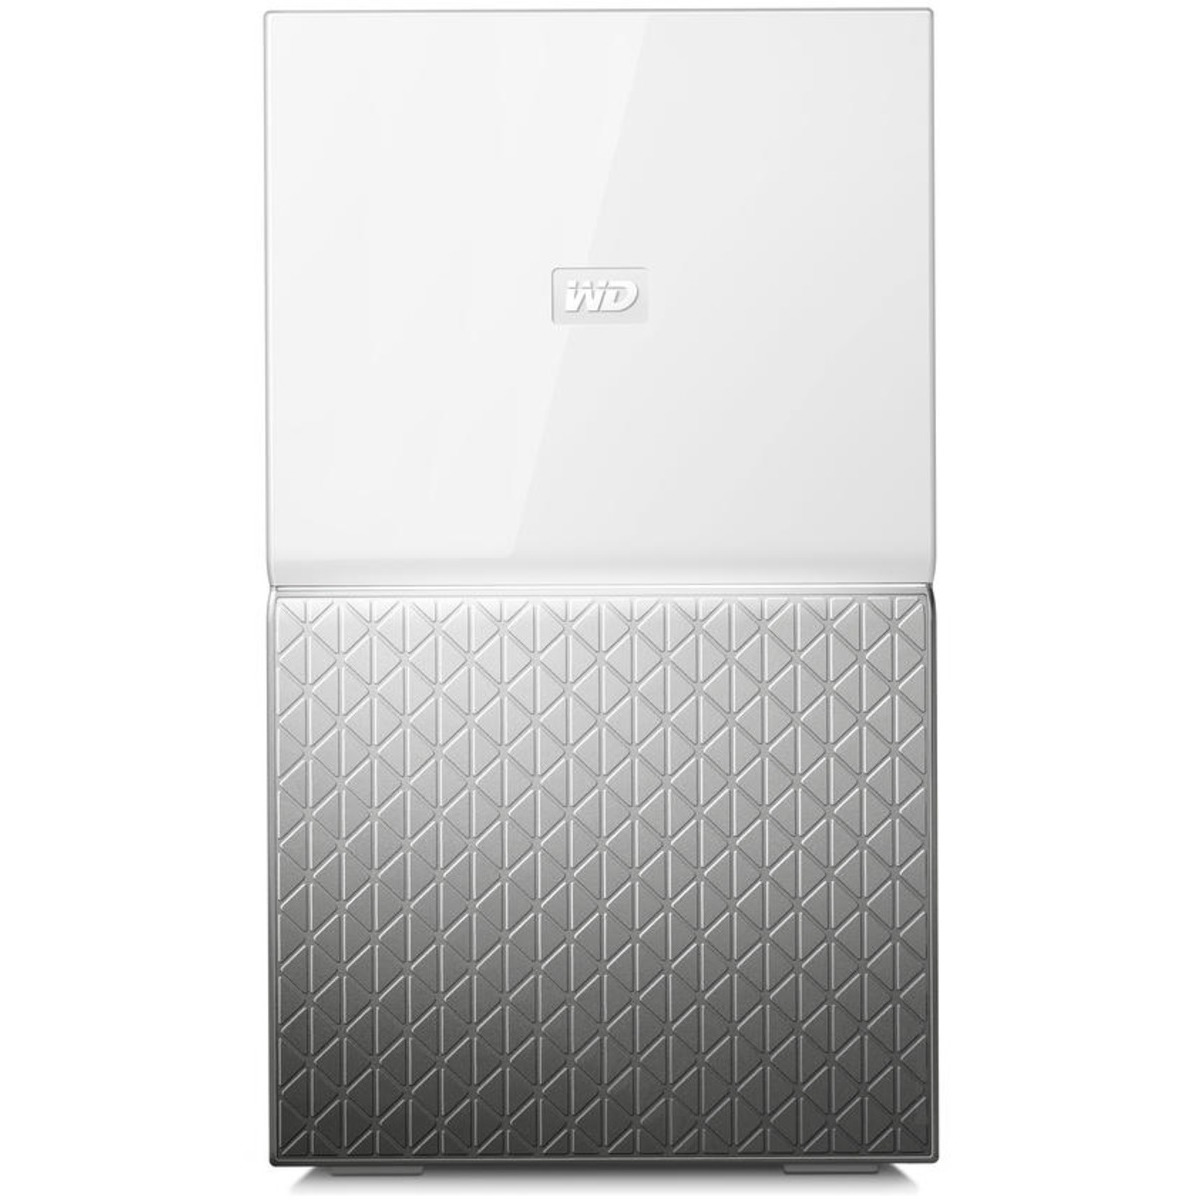 Western Digital My Cloud Home Duo 2tb 2-Bay Desktop Personal / Basic Home / Small Office DAS - Direct Attached Storage Device 2x1tb Western Digital Red SA500 WDS100T1R0A 2.5 560/530MB/s SATA 6Gb/s SSD NAS Class Drives Installed - Burn-In Tested My Cloud Home Duo